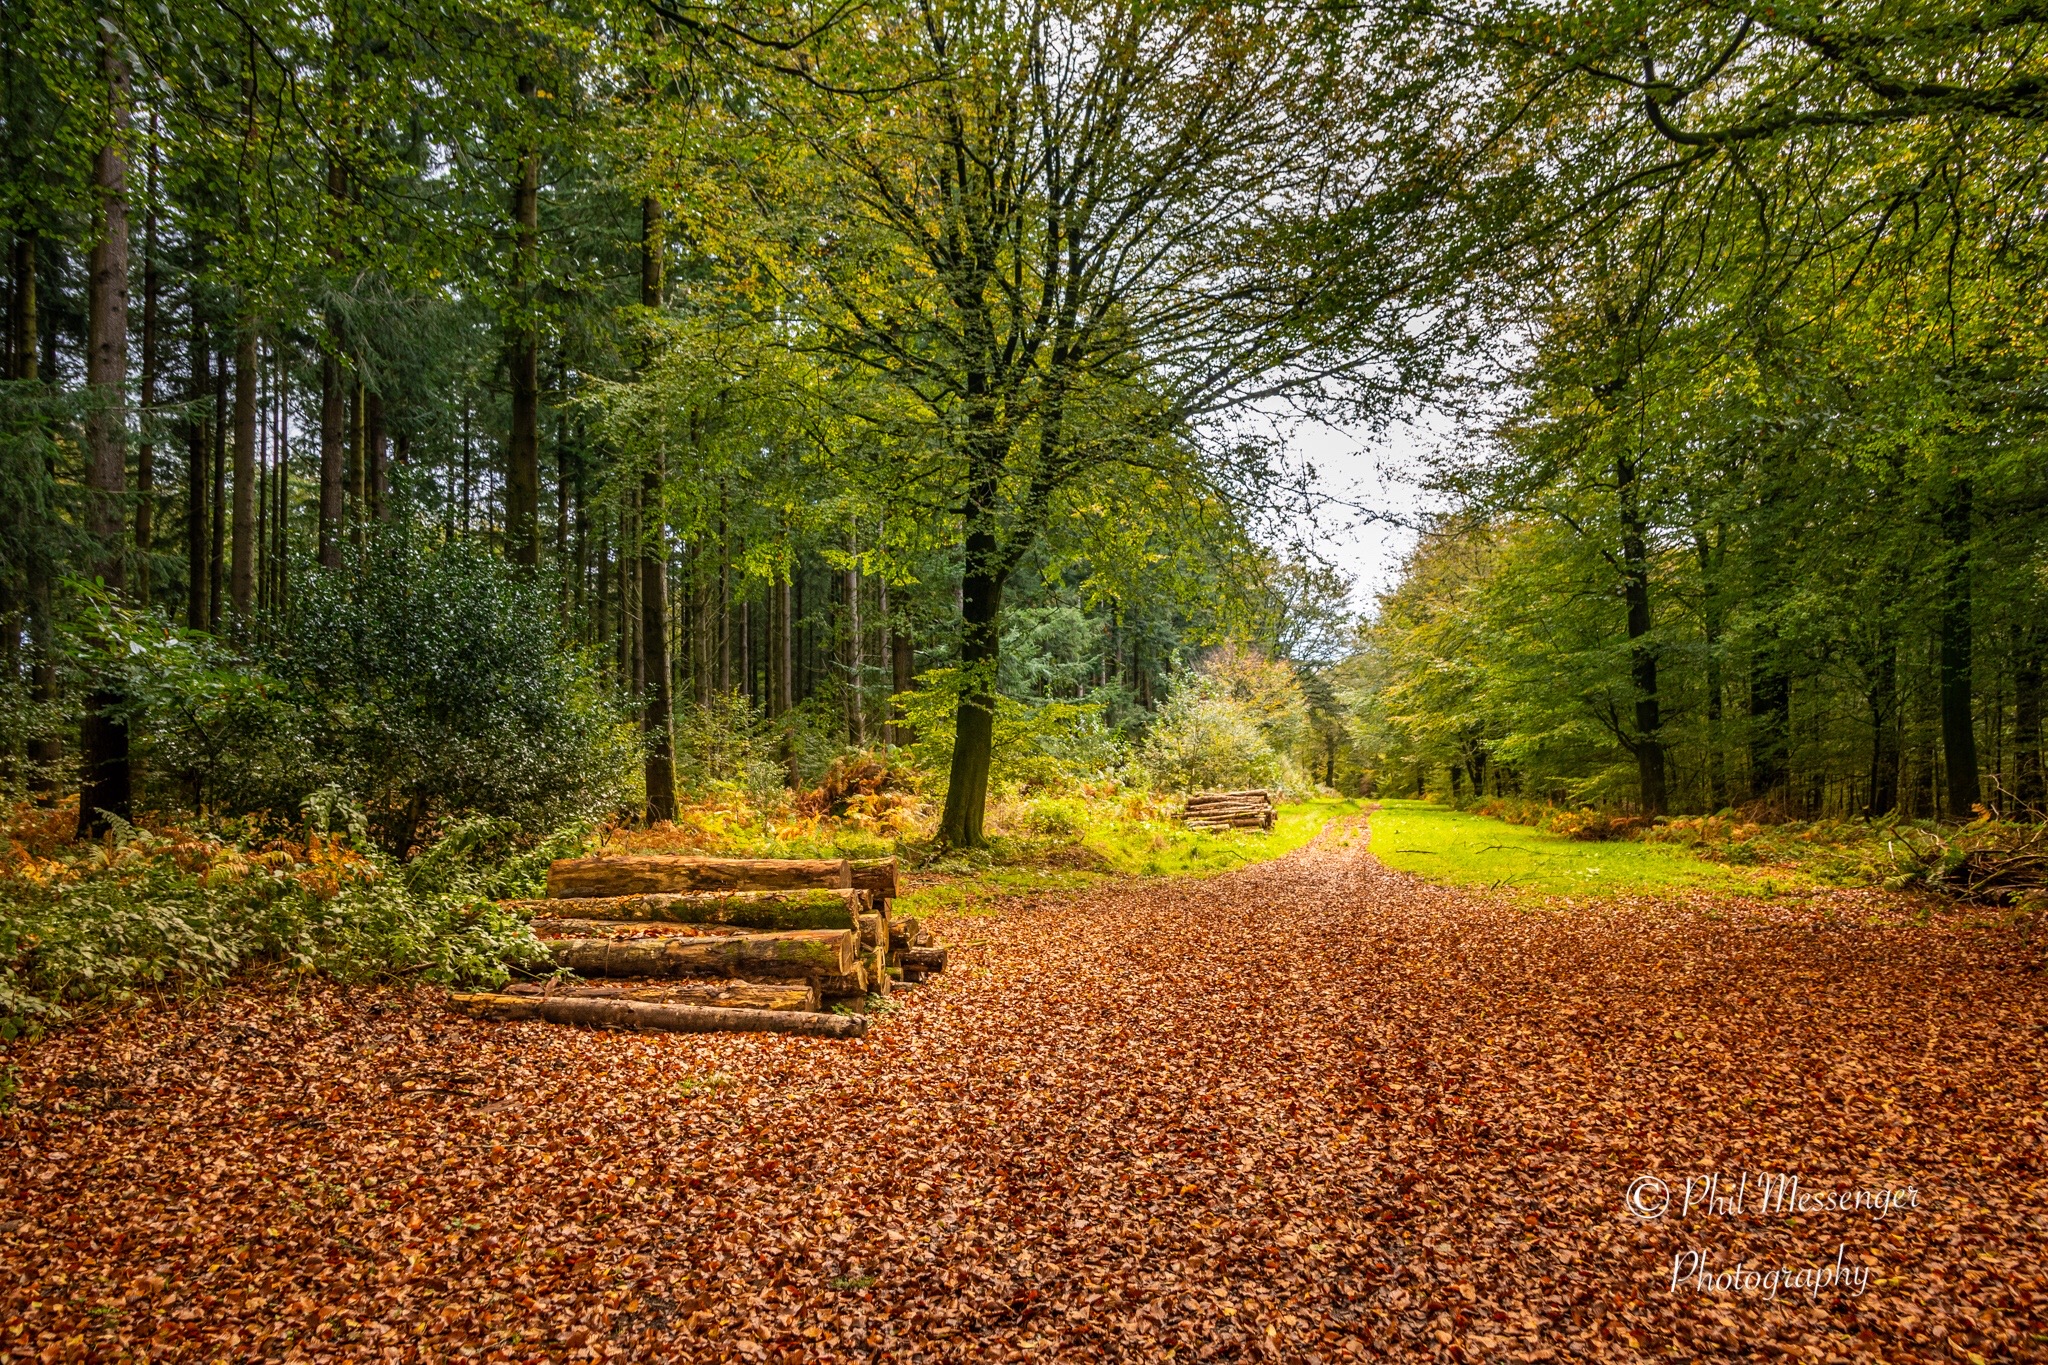 A wander through the woods at Stourhead National trust Wiltshire.